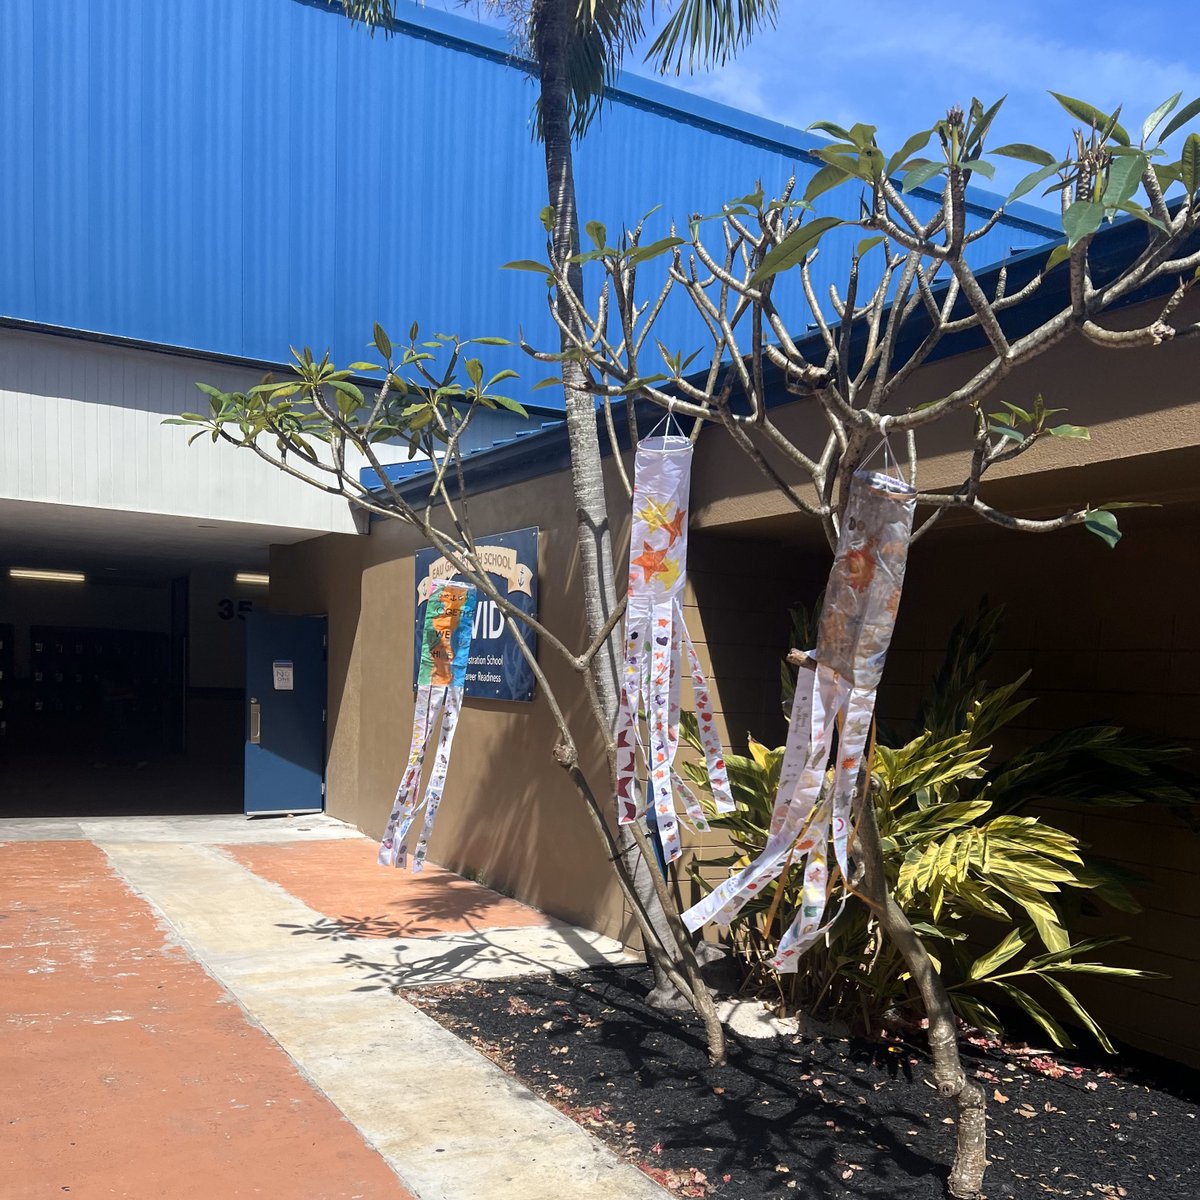 #FridayFriendsday @EauGallieHighSchool's courtyard is now adorned with the whimsical creations lovingly created by their students and our teaching artist Mary Moon! From vibrant swirls to dancing patterns, these windsocks will now bring joy to all who pass by! #WindsockWonders